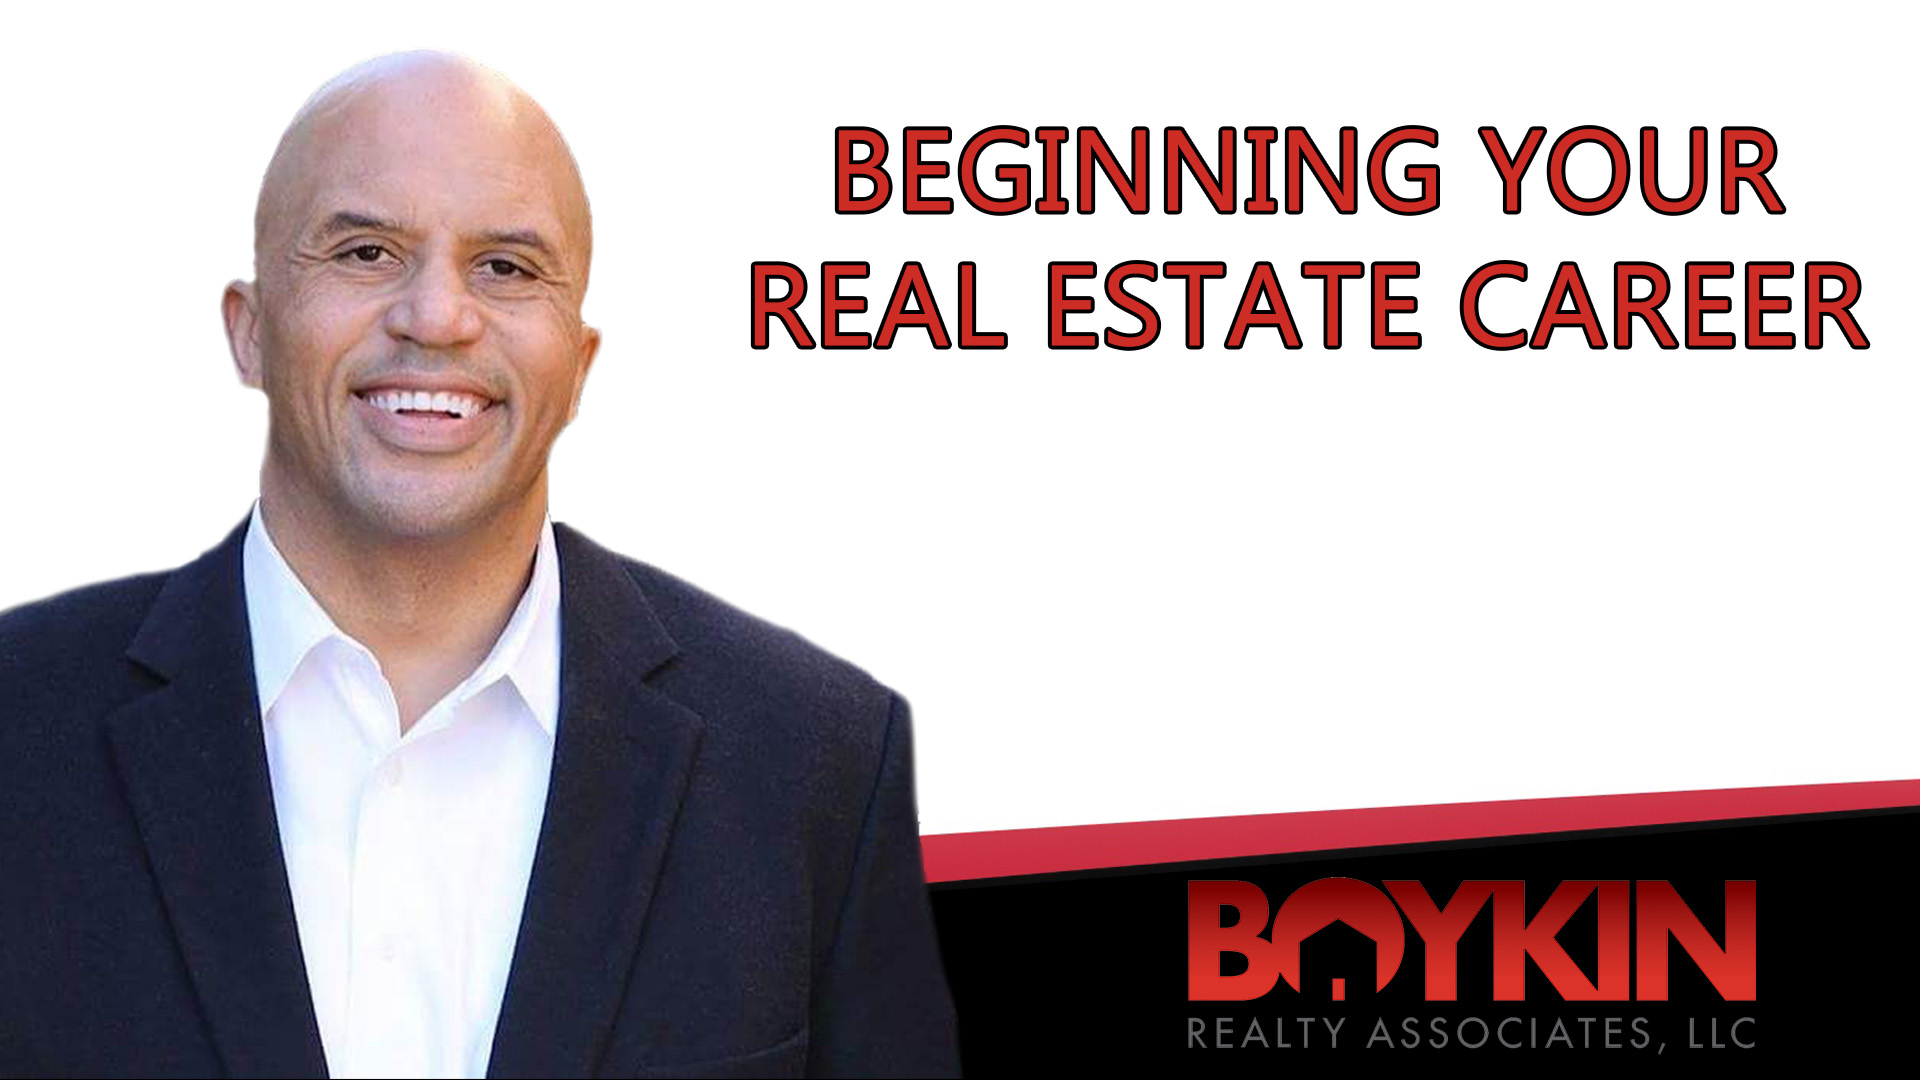 Steps to Becoming a Realtor, Continued